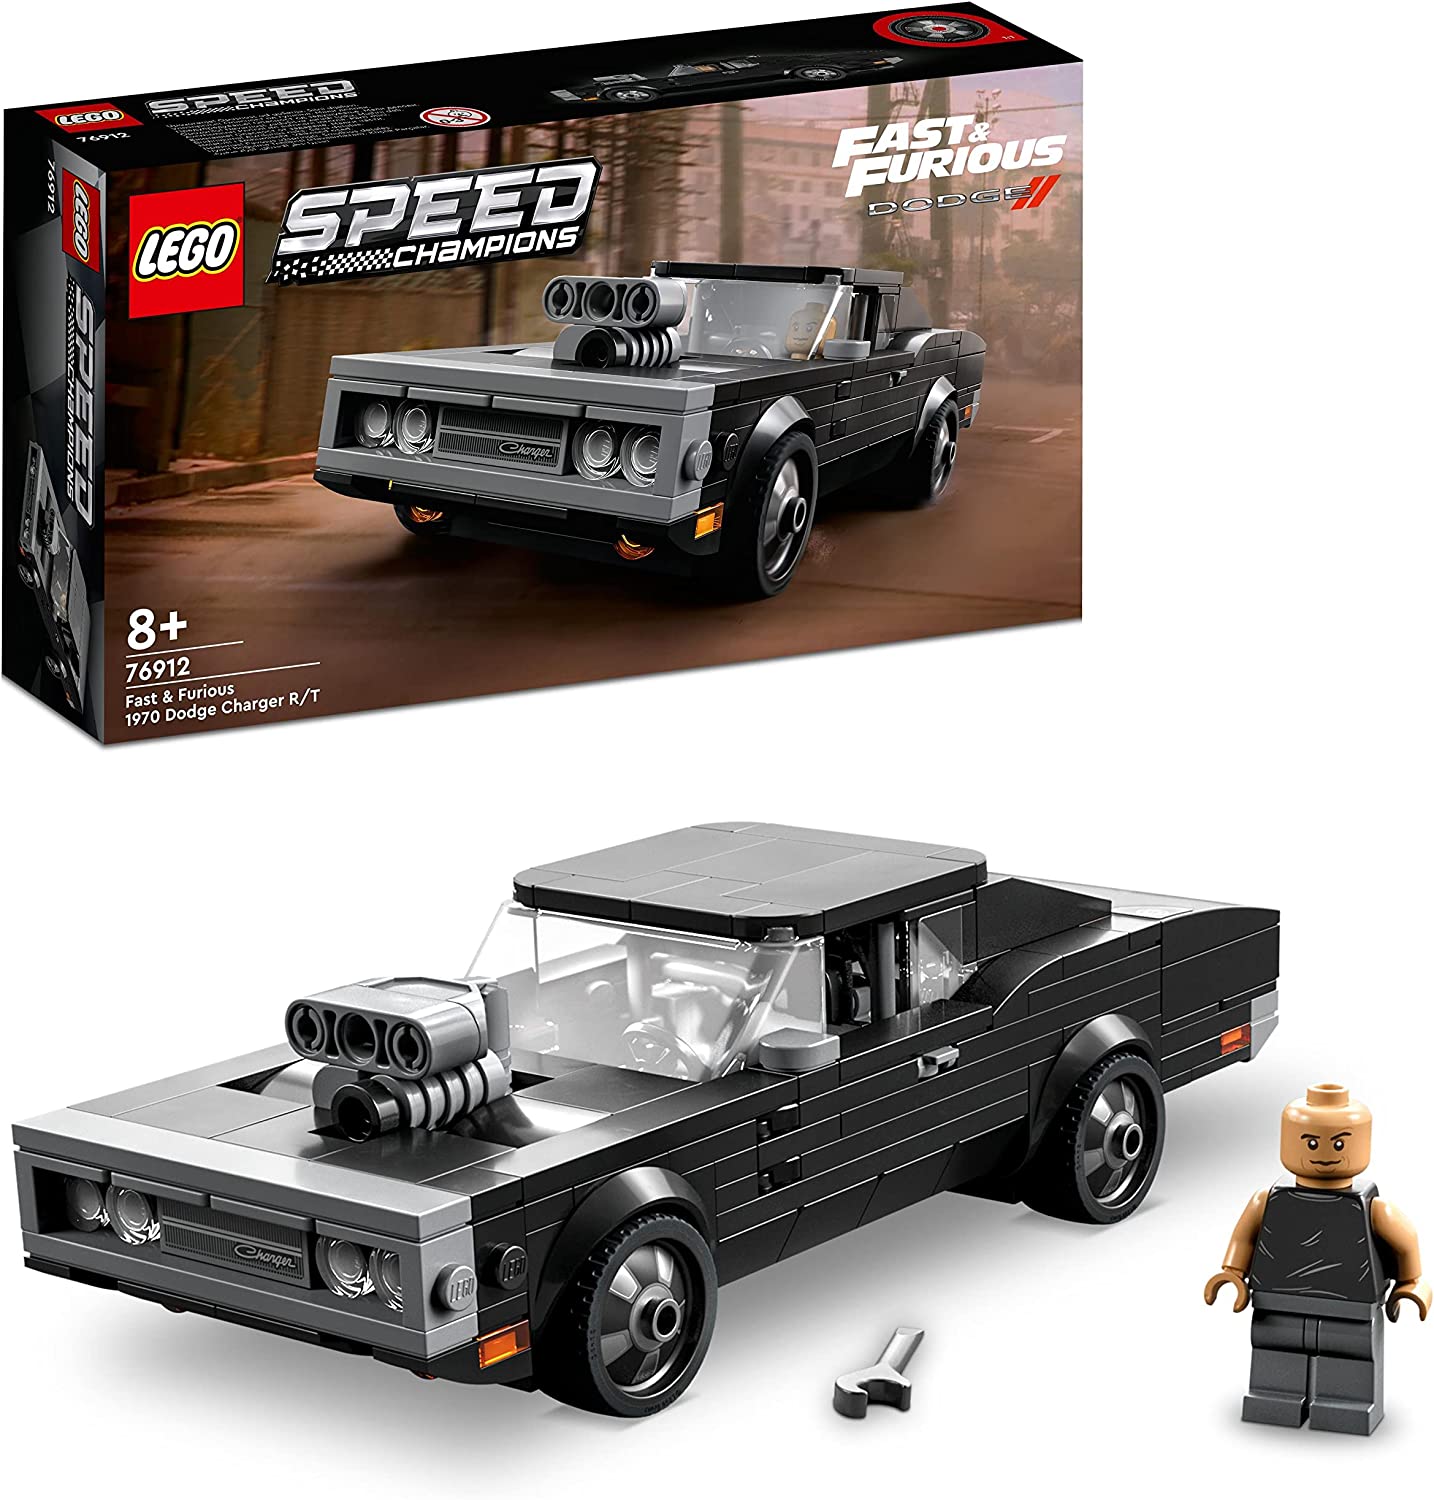 LEGO 76912 Speed Champions Fast & Furious 1970 Dodge Charger R/T, Toy Car Model for Building for Children, Set with Dominic Toretto Mini Figure